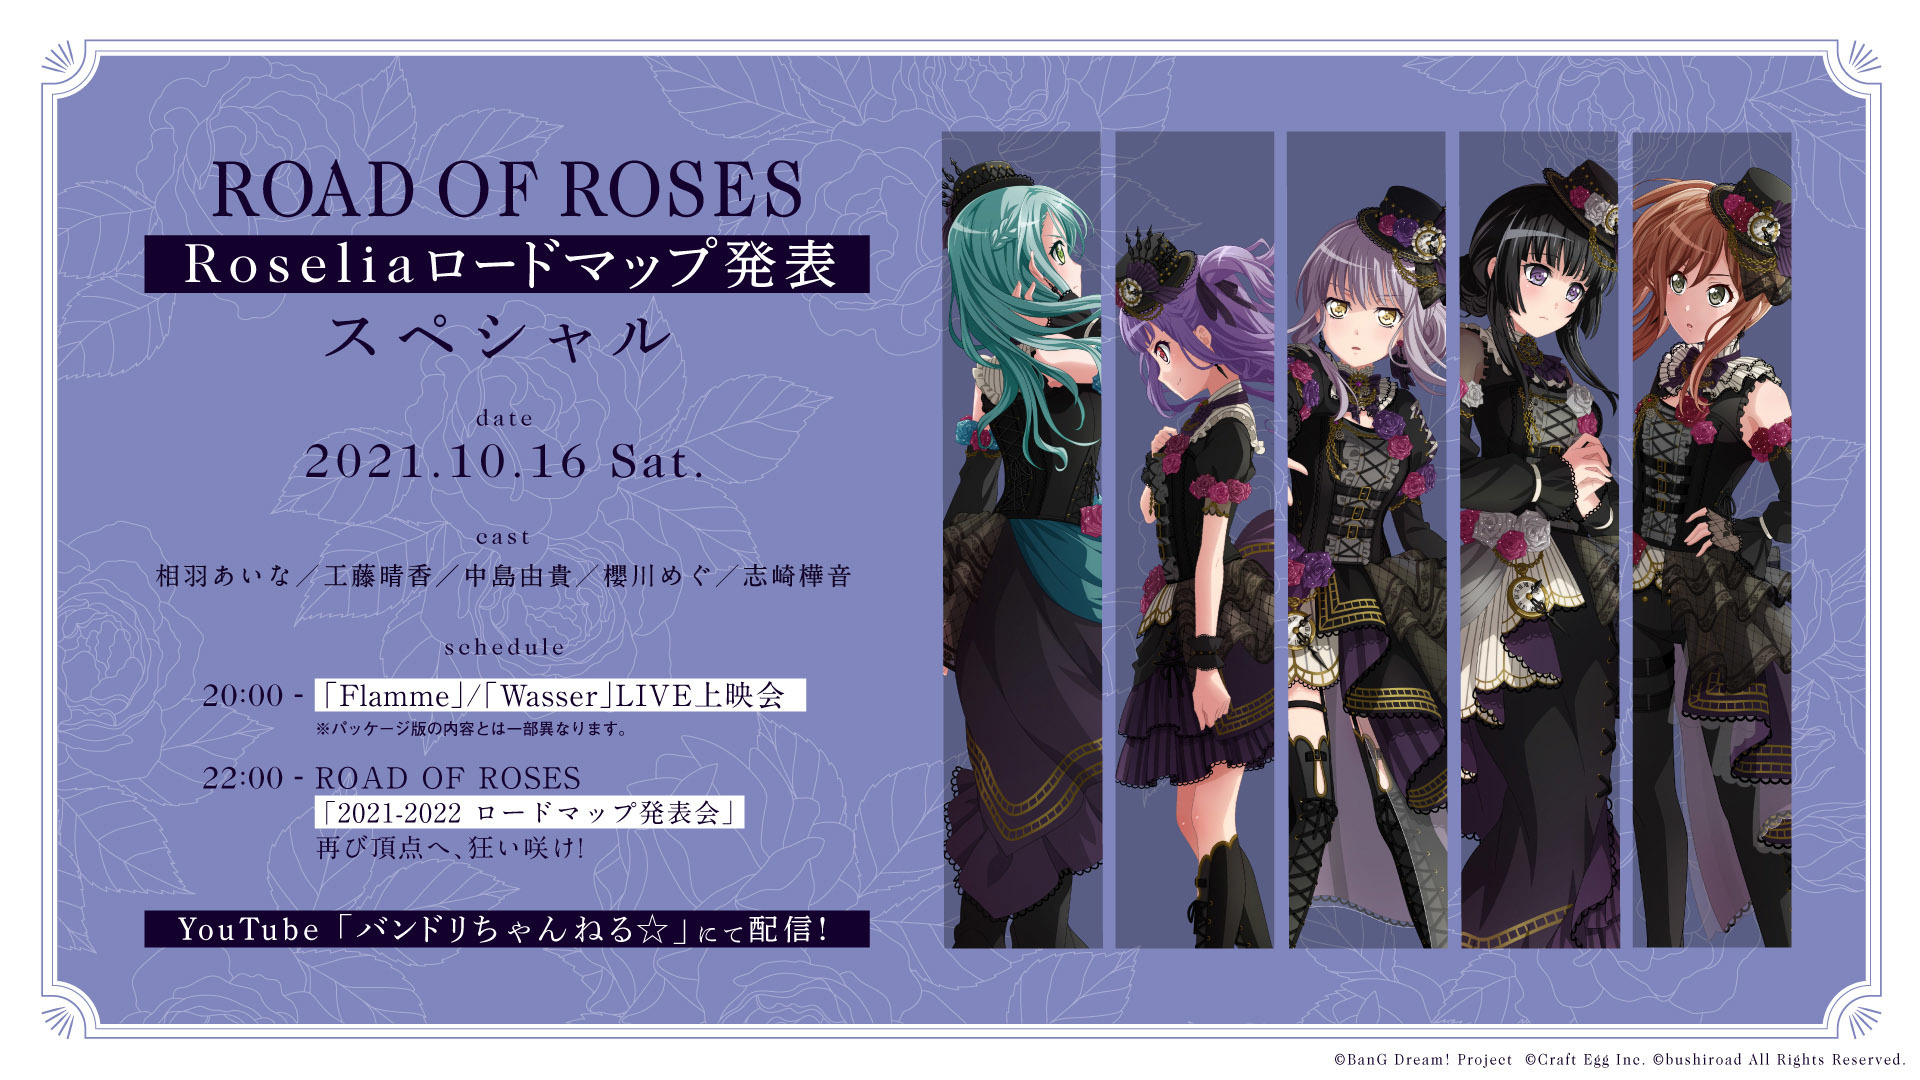 「ROAD OF ROSES -Roseliaロードマップ発表スペシャル-」 (c)BanG Dream! Project (c)Craft Egg Inc. (c)bushiroad All Rights Reserved.